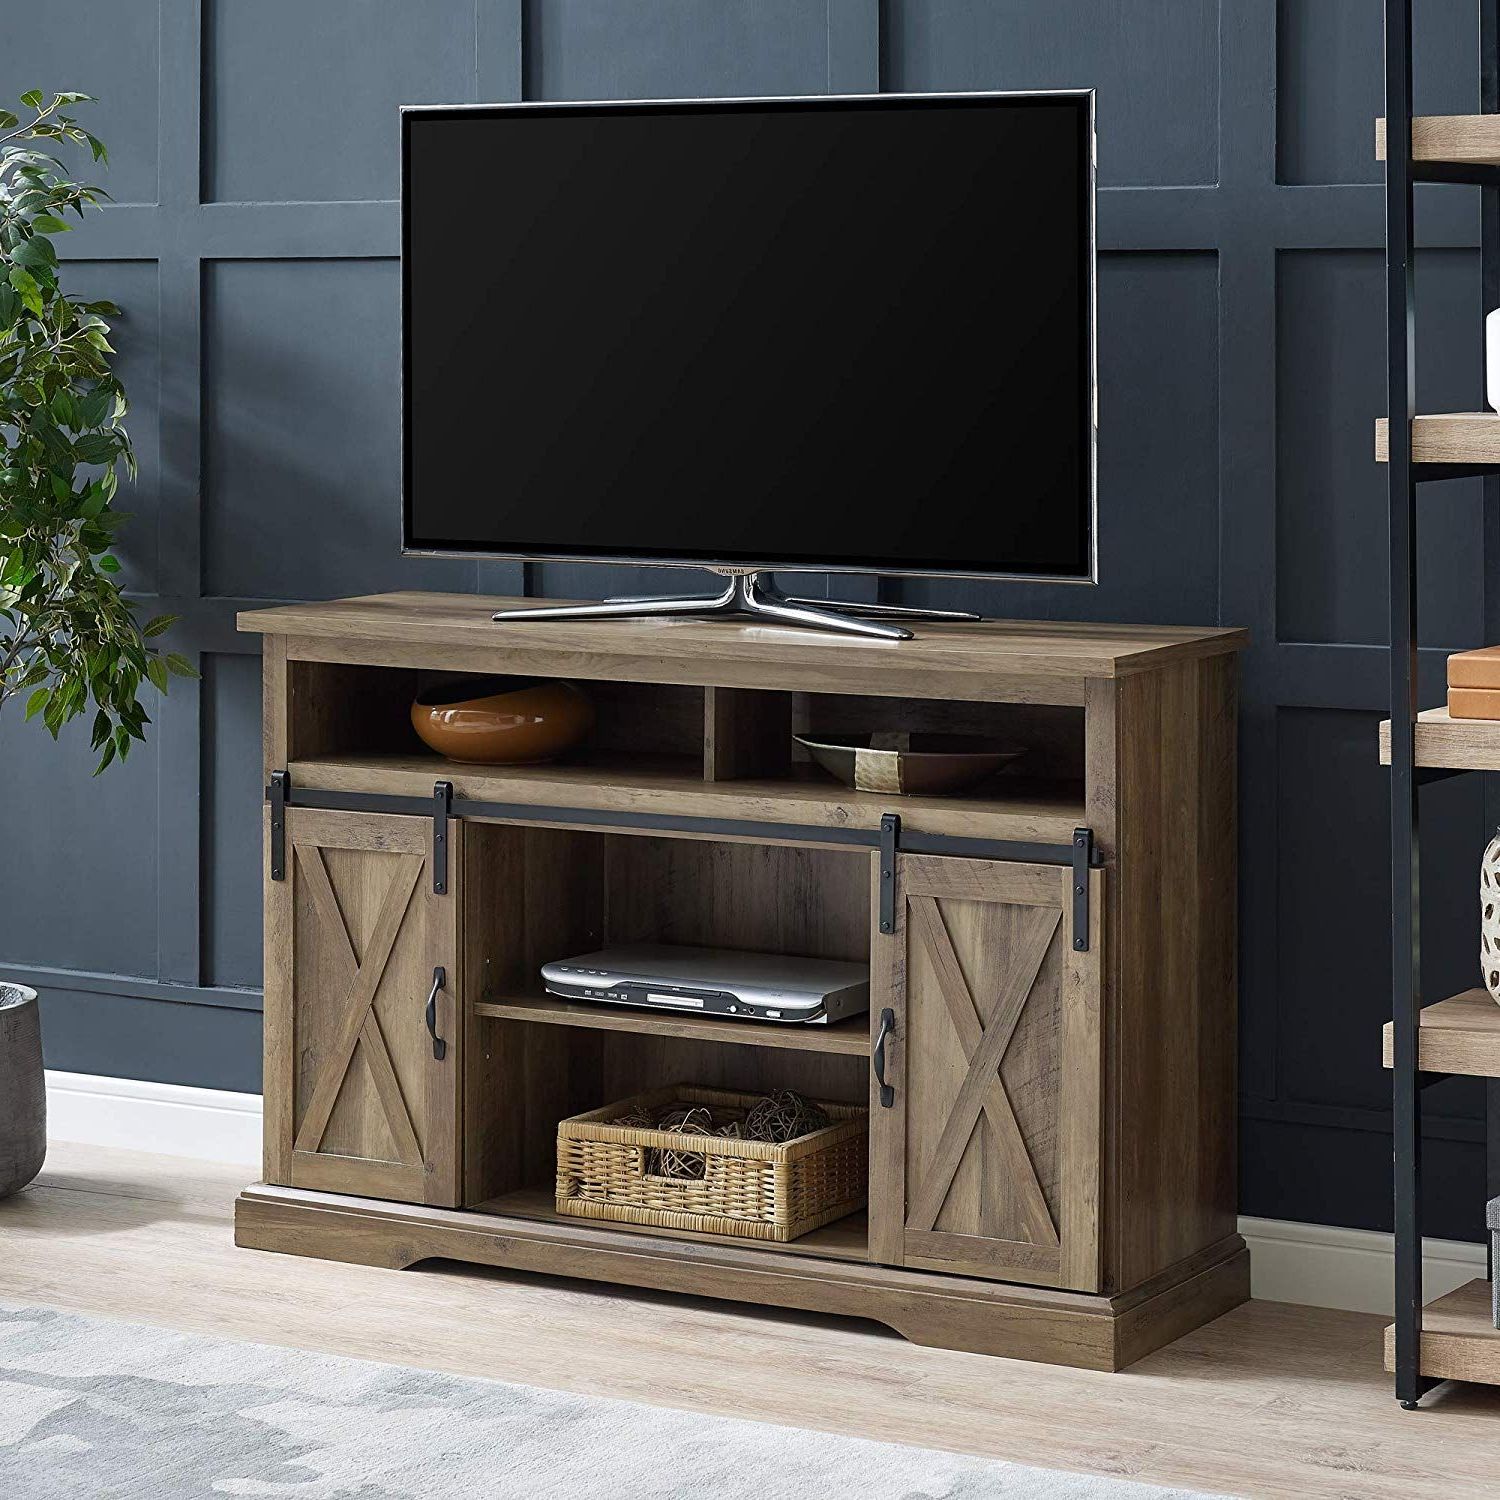 Well Known Farmhouse Tv Stands & Rustic Tv Stands – Farmhouse Goals (View 8 of 15)